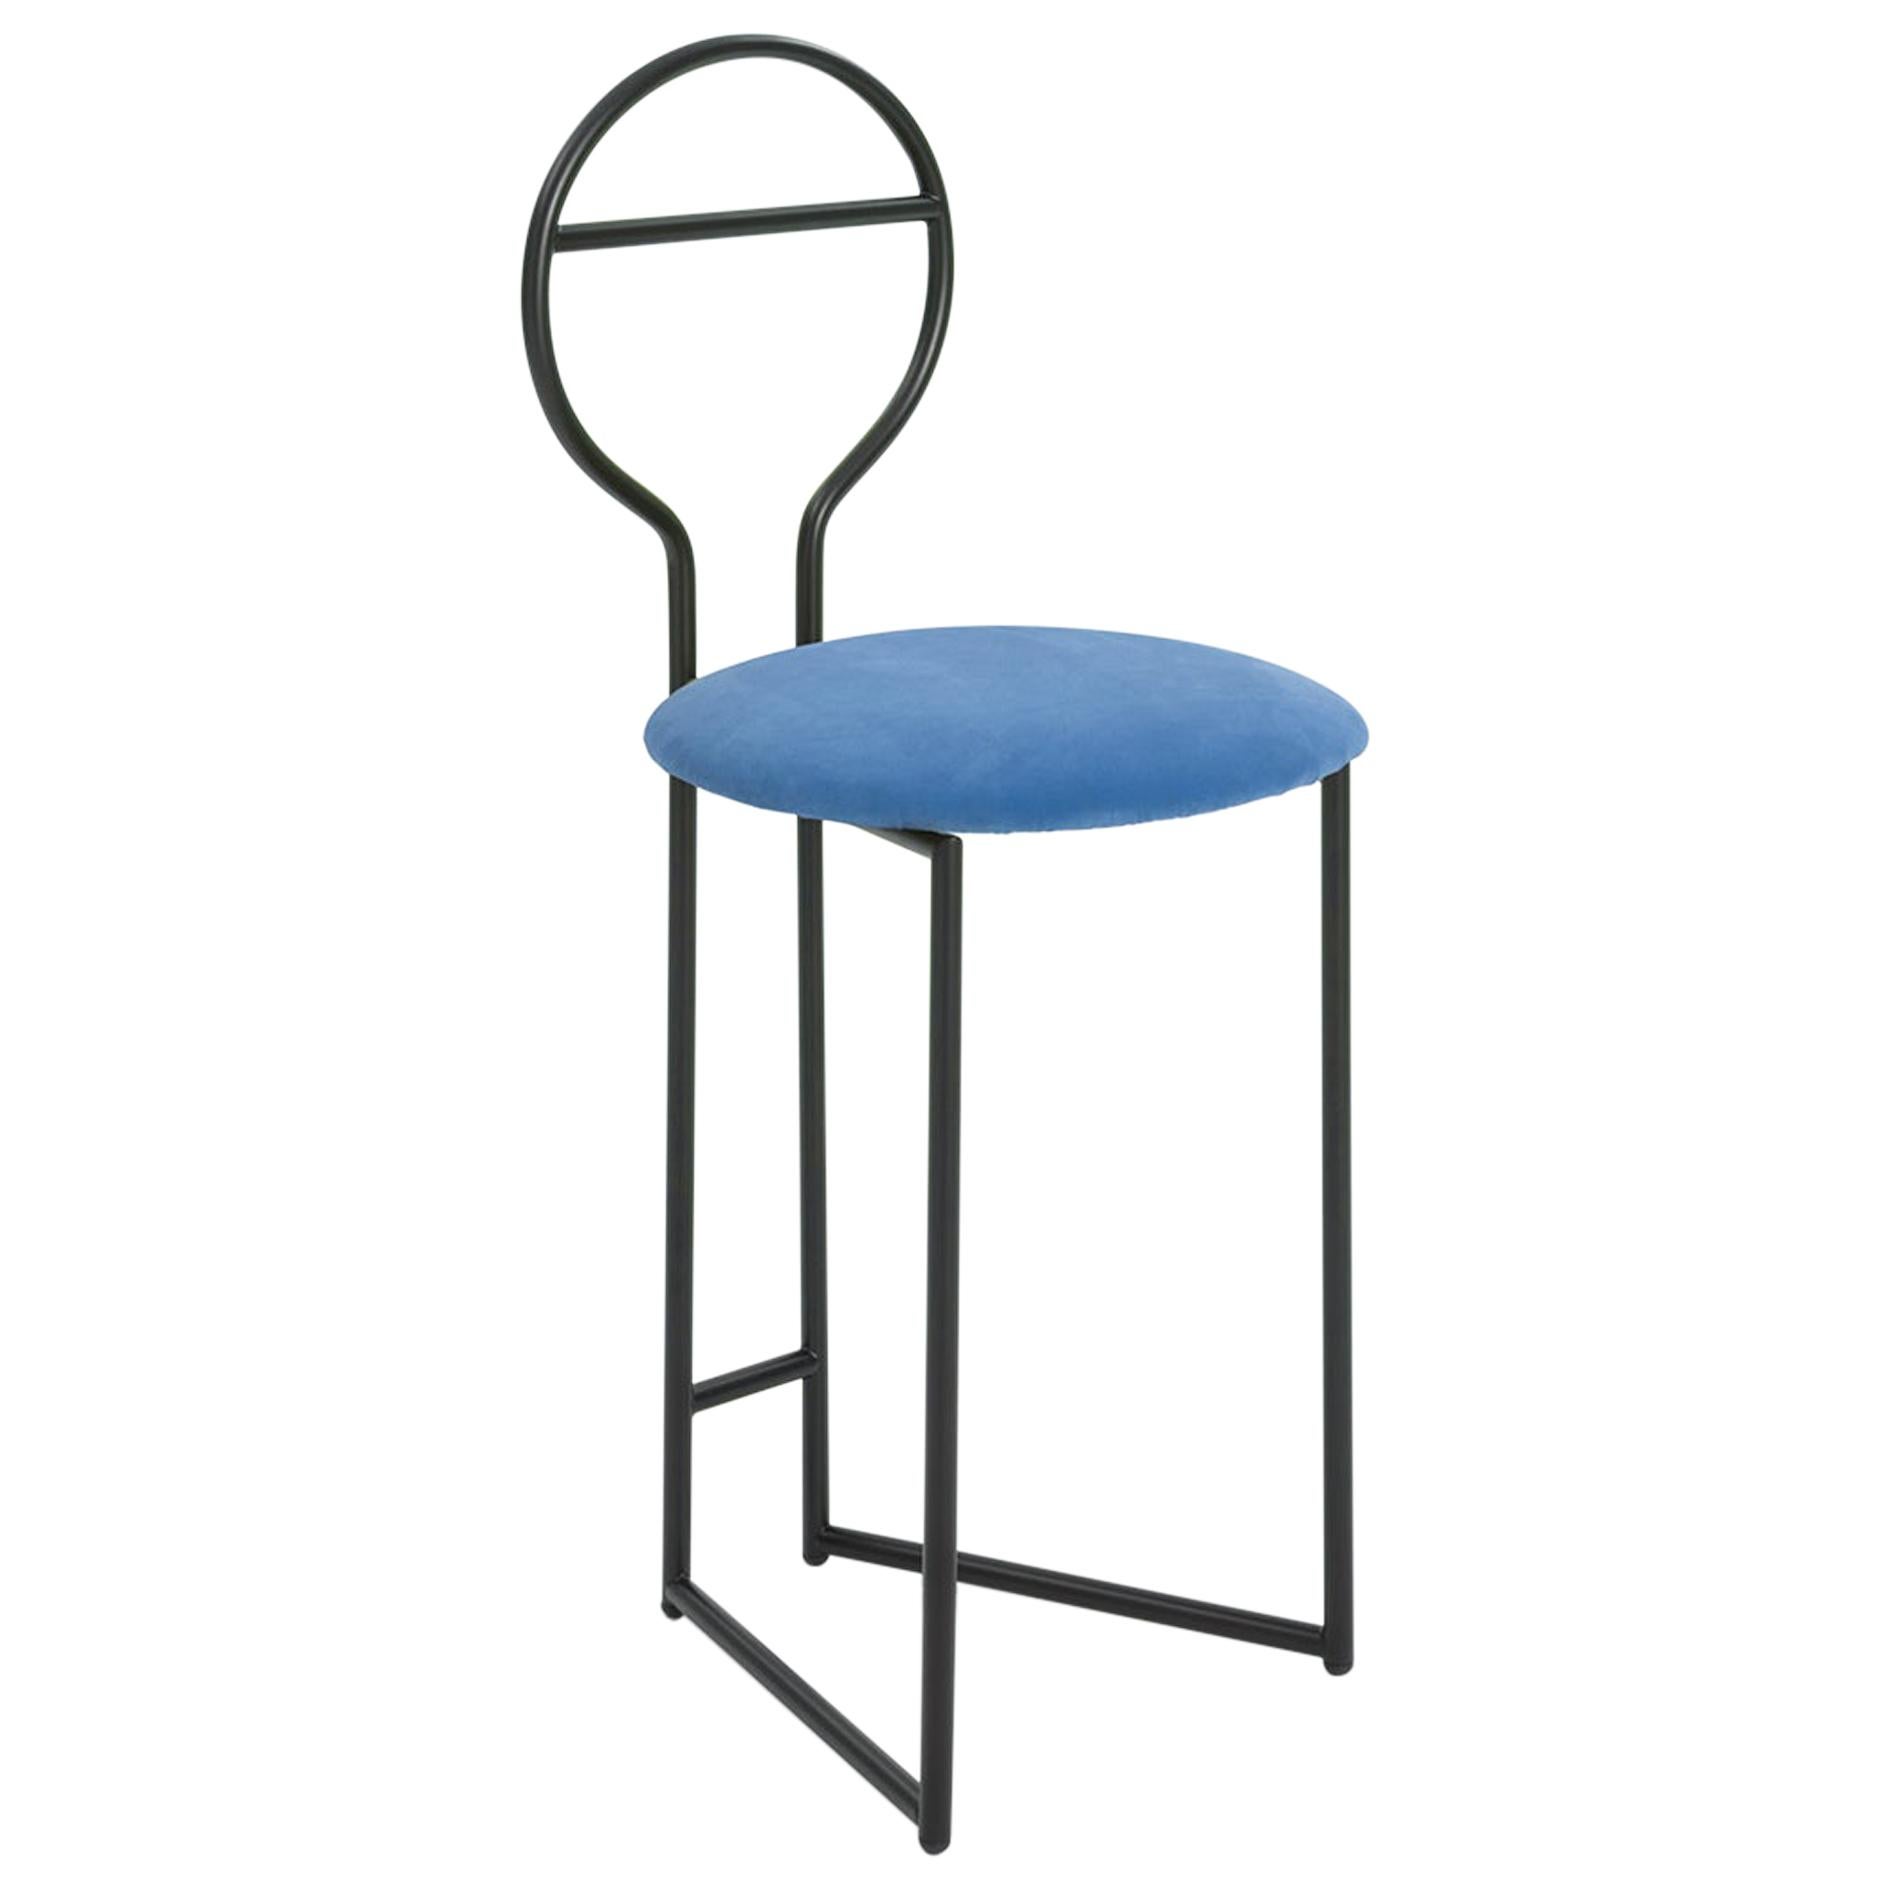 Joly Chairdrobe, Low Back, Black Structure and Blue Fine Italian Velvet